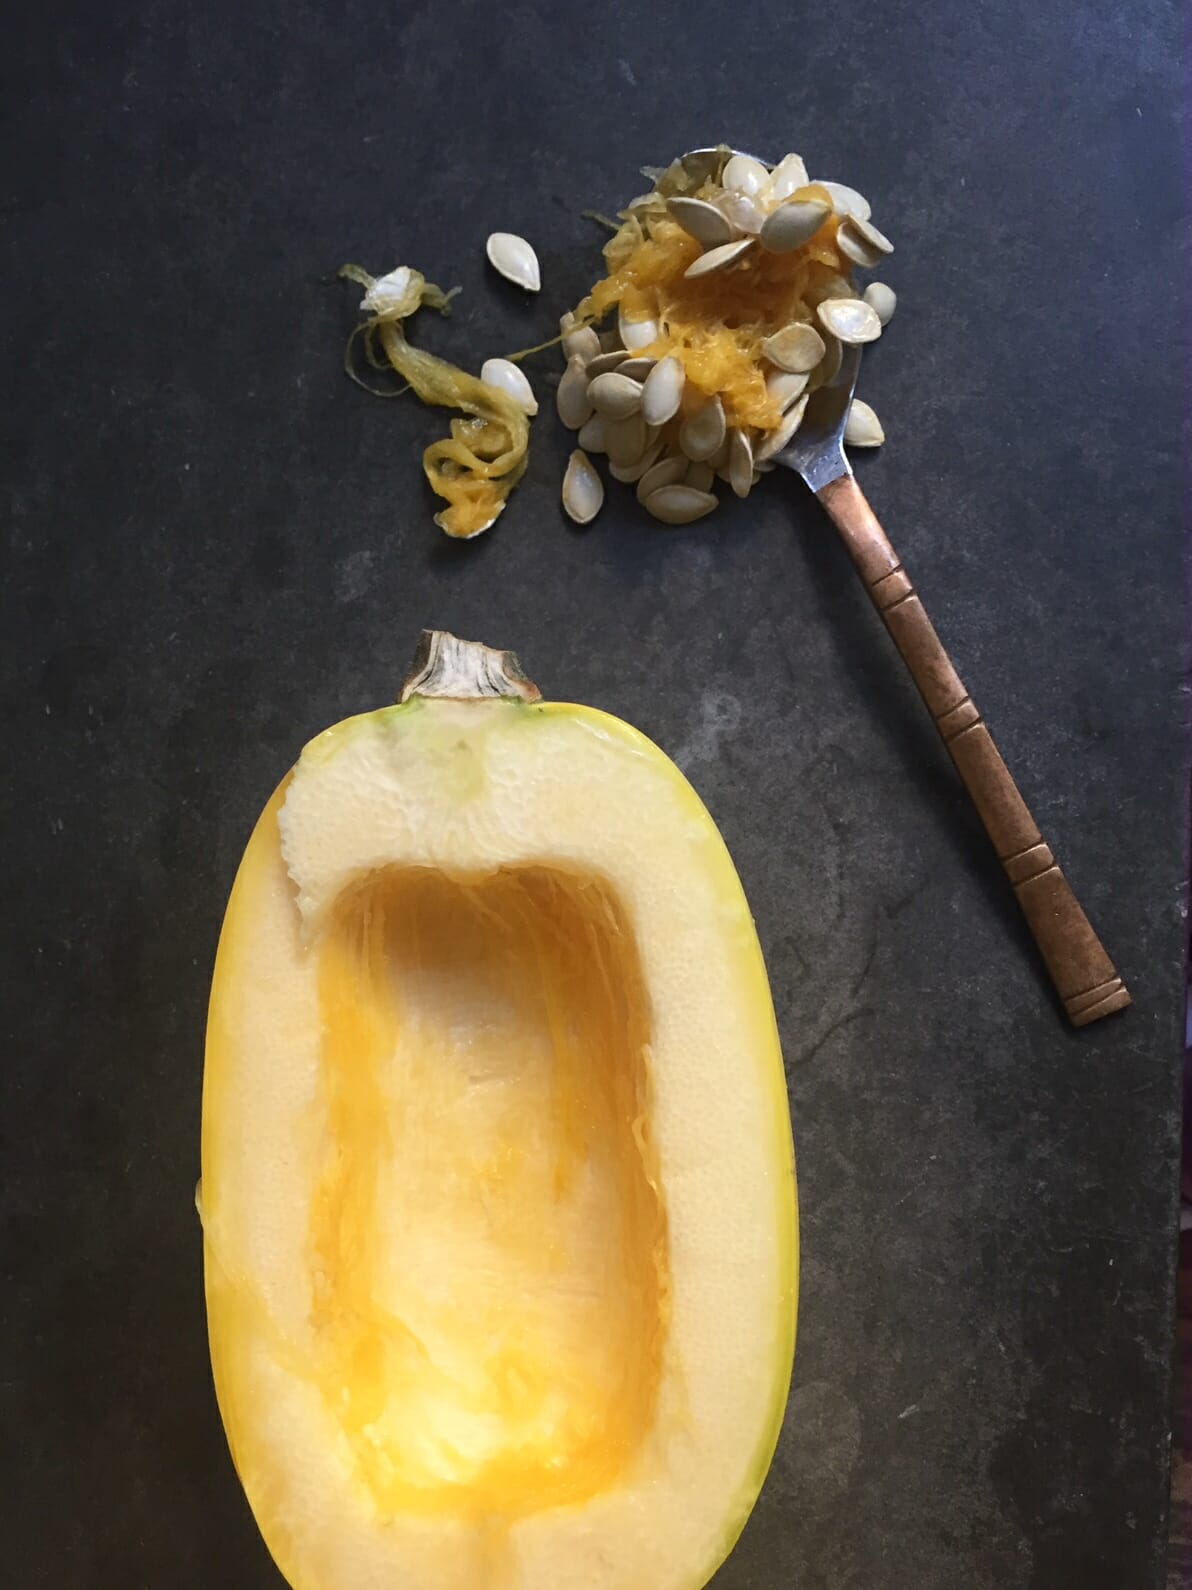 Removing the seeds from a squash